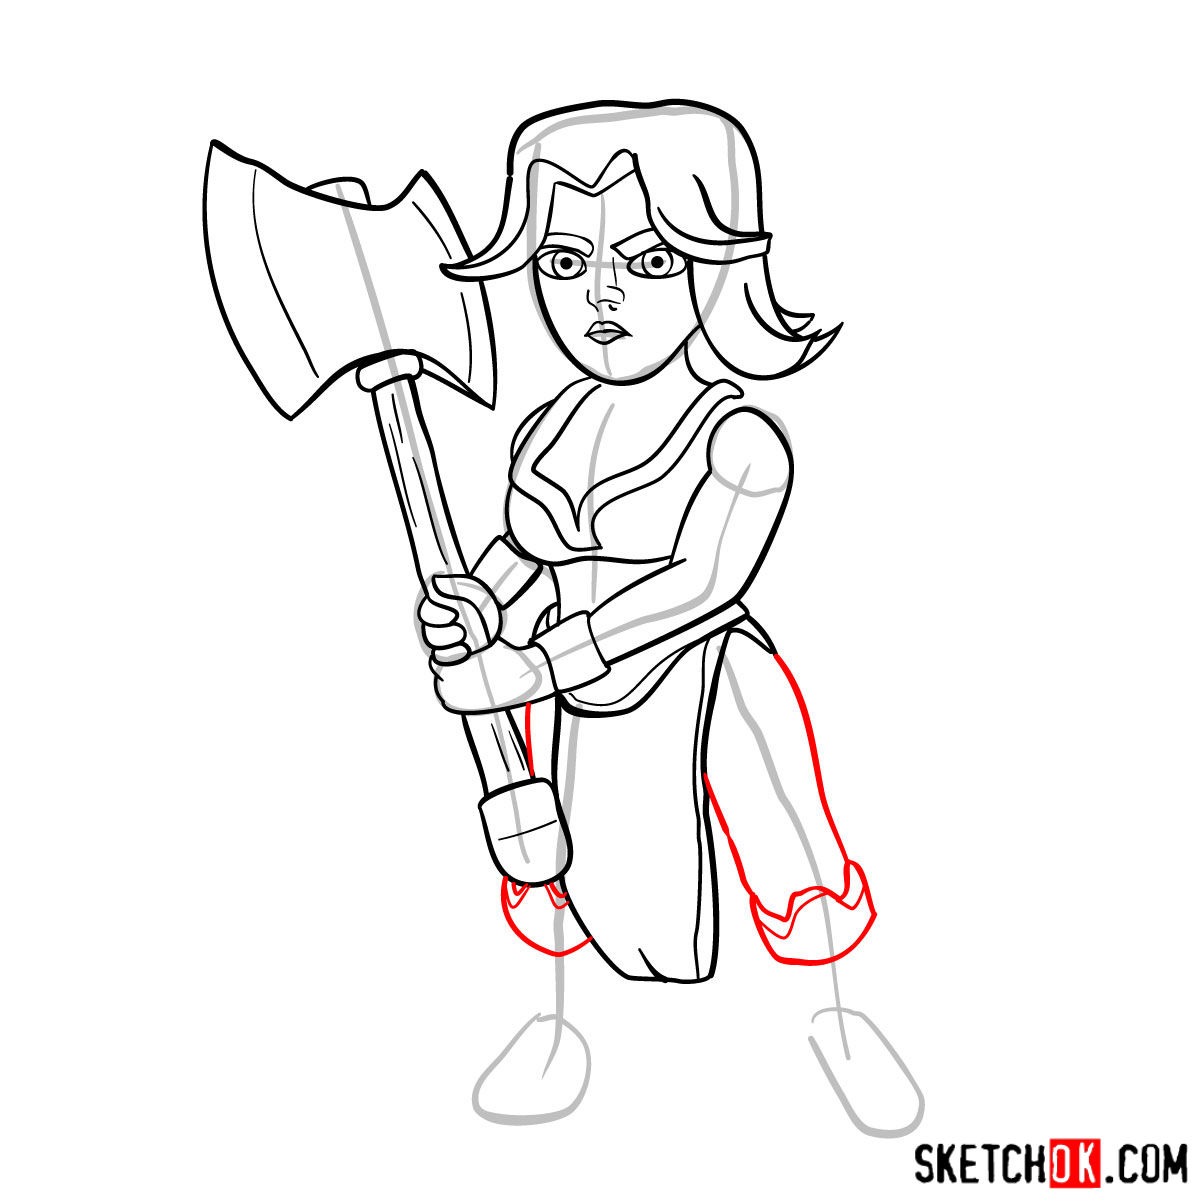 How to draw Valkyrie from Clash of Clans - step 10